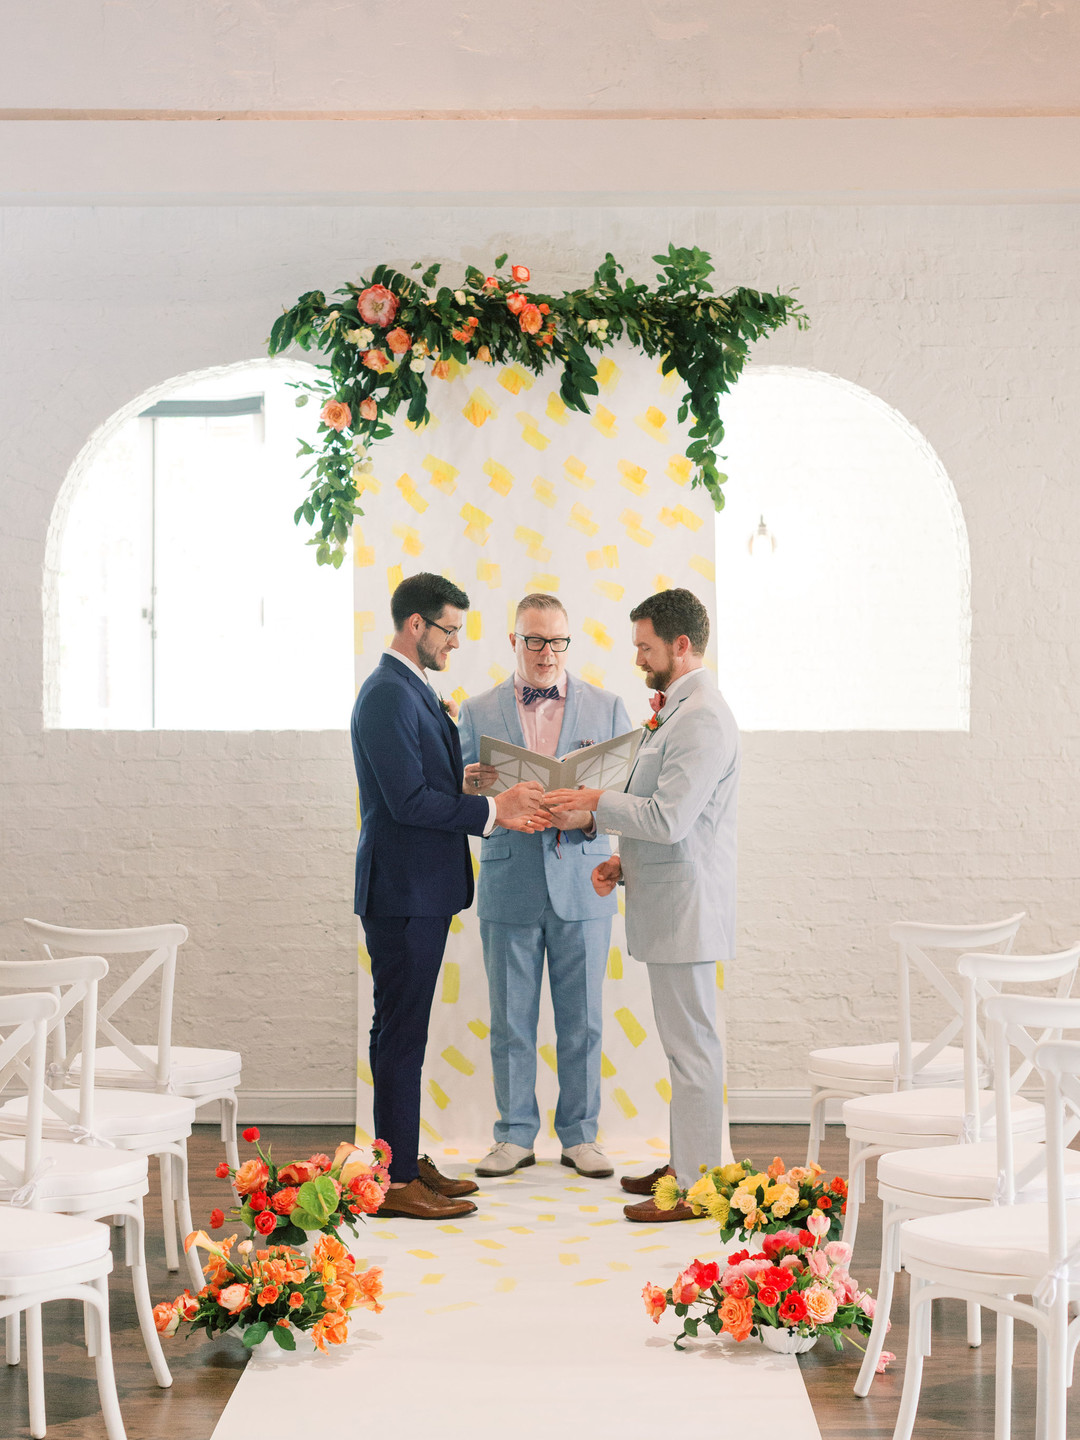 Summer citrus wedding inspiration at historic post office LGBTQ+ weddings two grooms gay wedding blue suit white gray suit orange blue bright colorful summery styled shoot vows